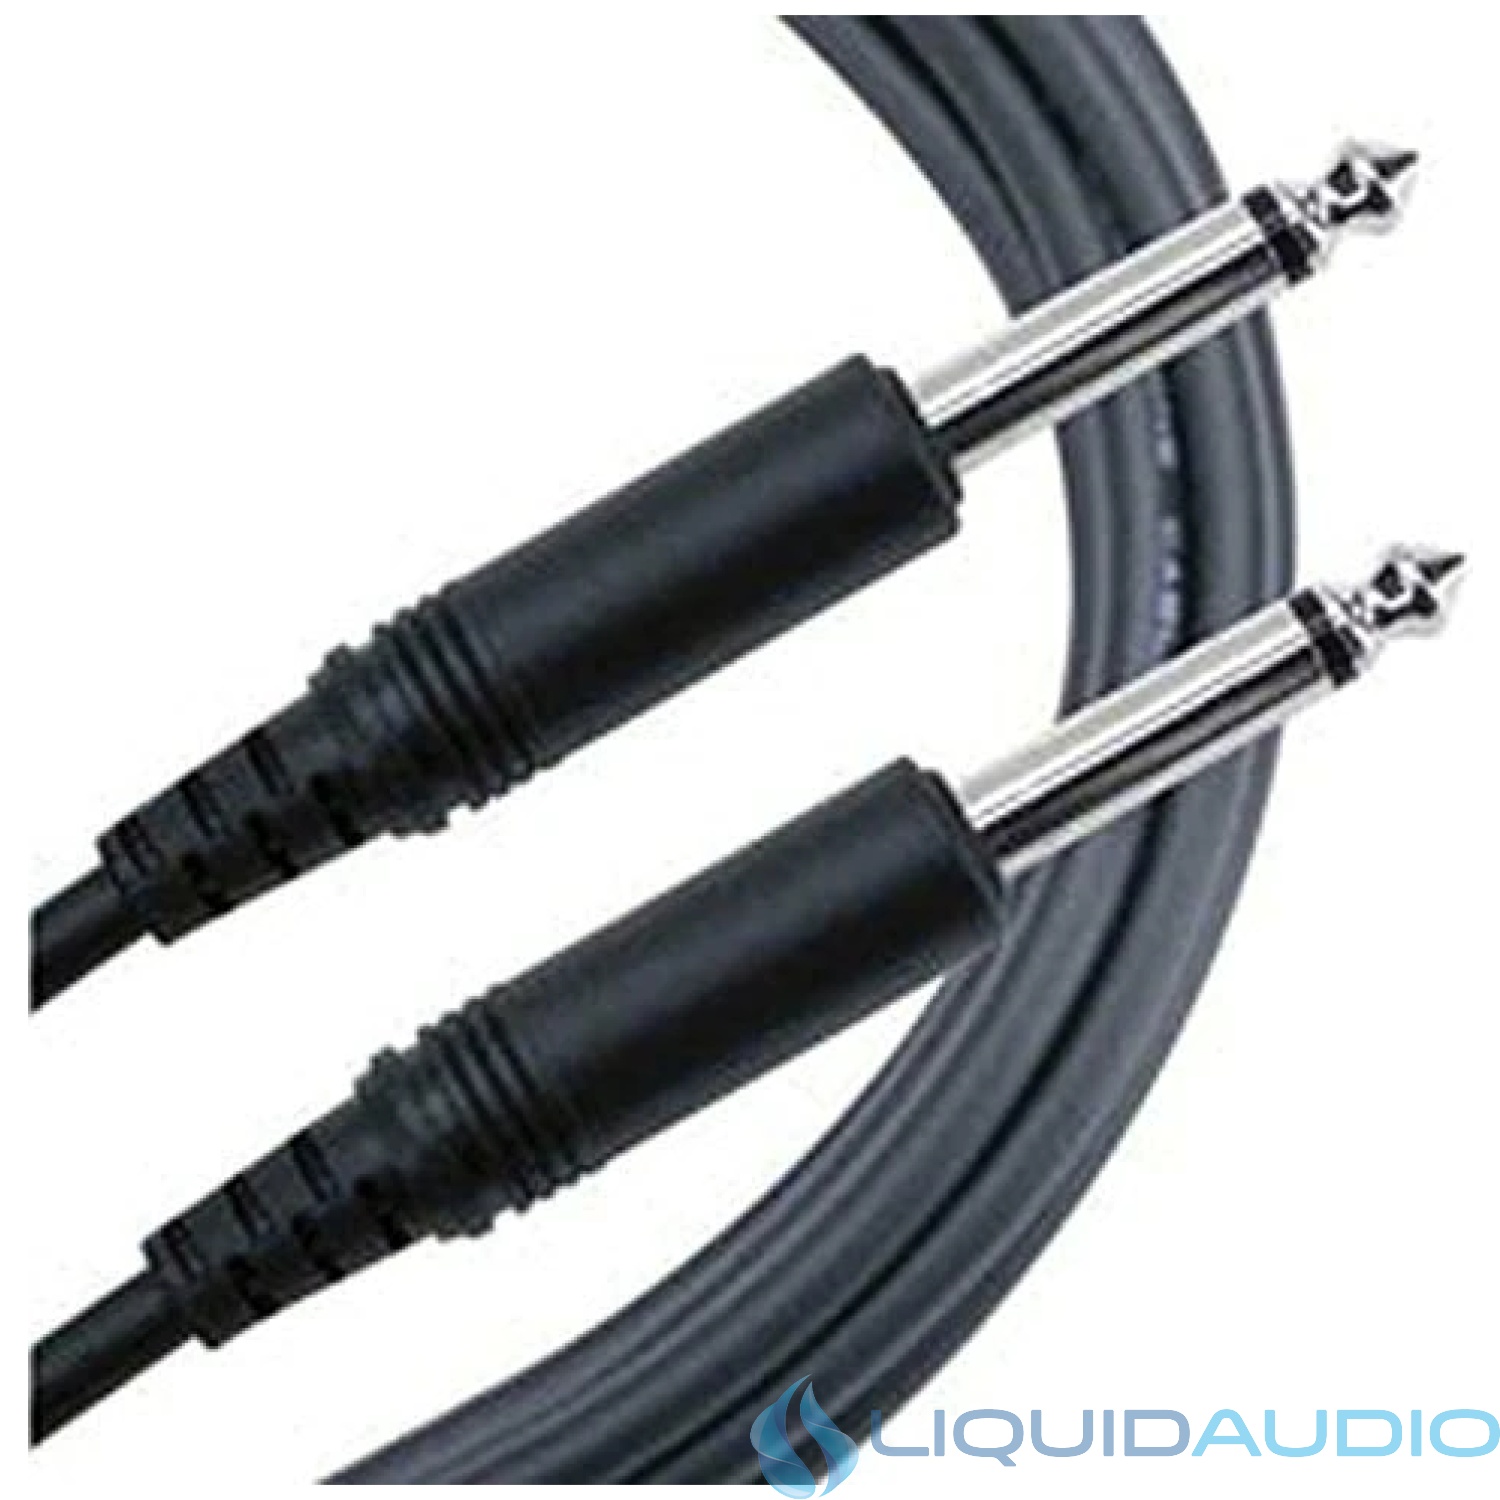 Mogami Pure Patch PP-01 1/4 to 1/4 Unbalanced Patch Cable 1 foot